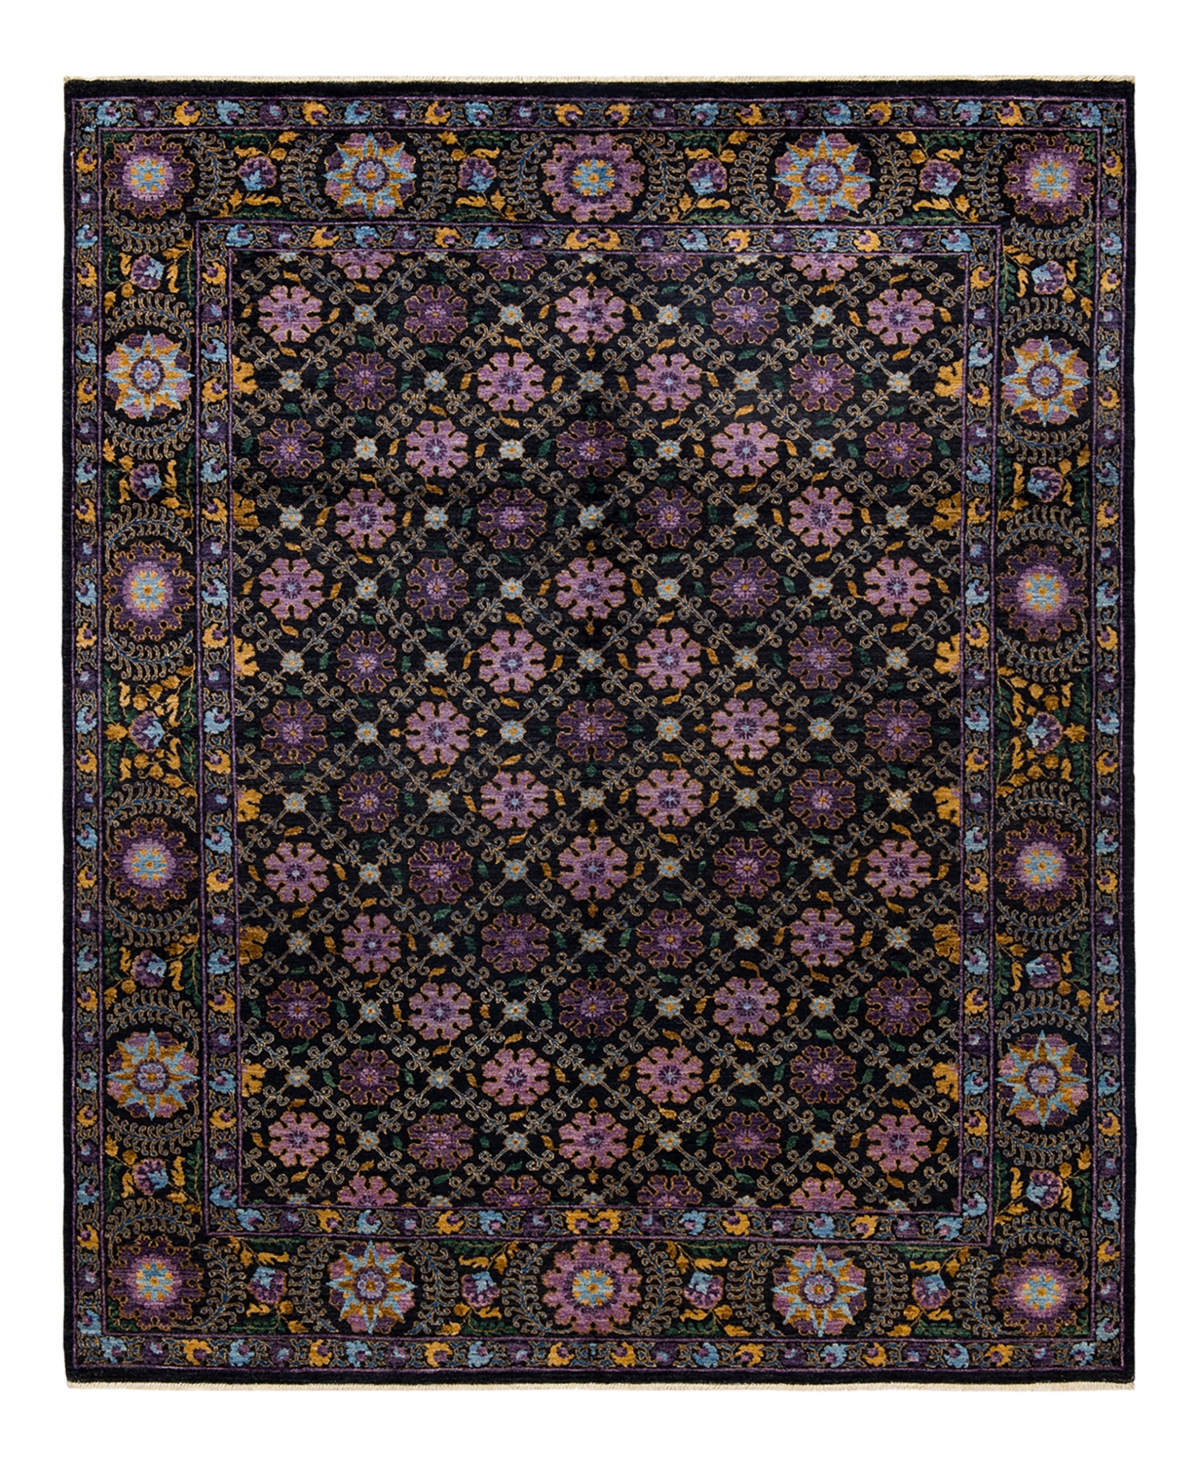 Adorn Hand Woven Rugs Suzani M1647 8'2in x 10'2in Area Rug - Black